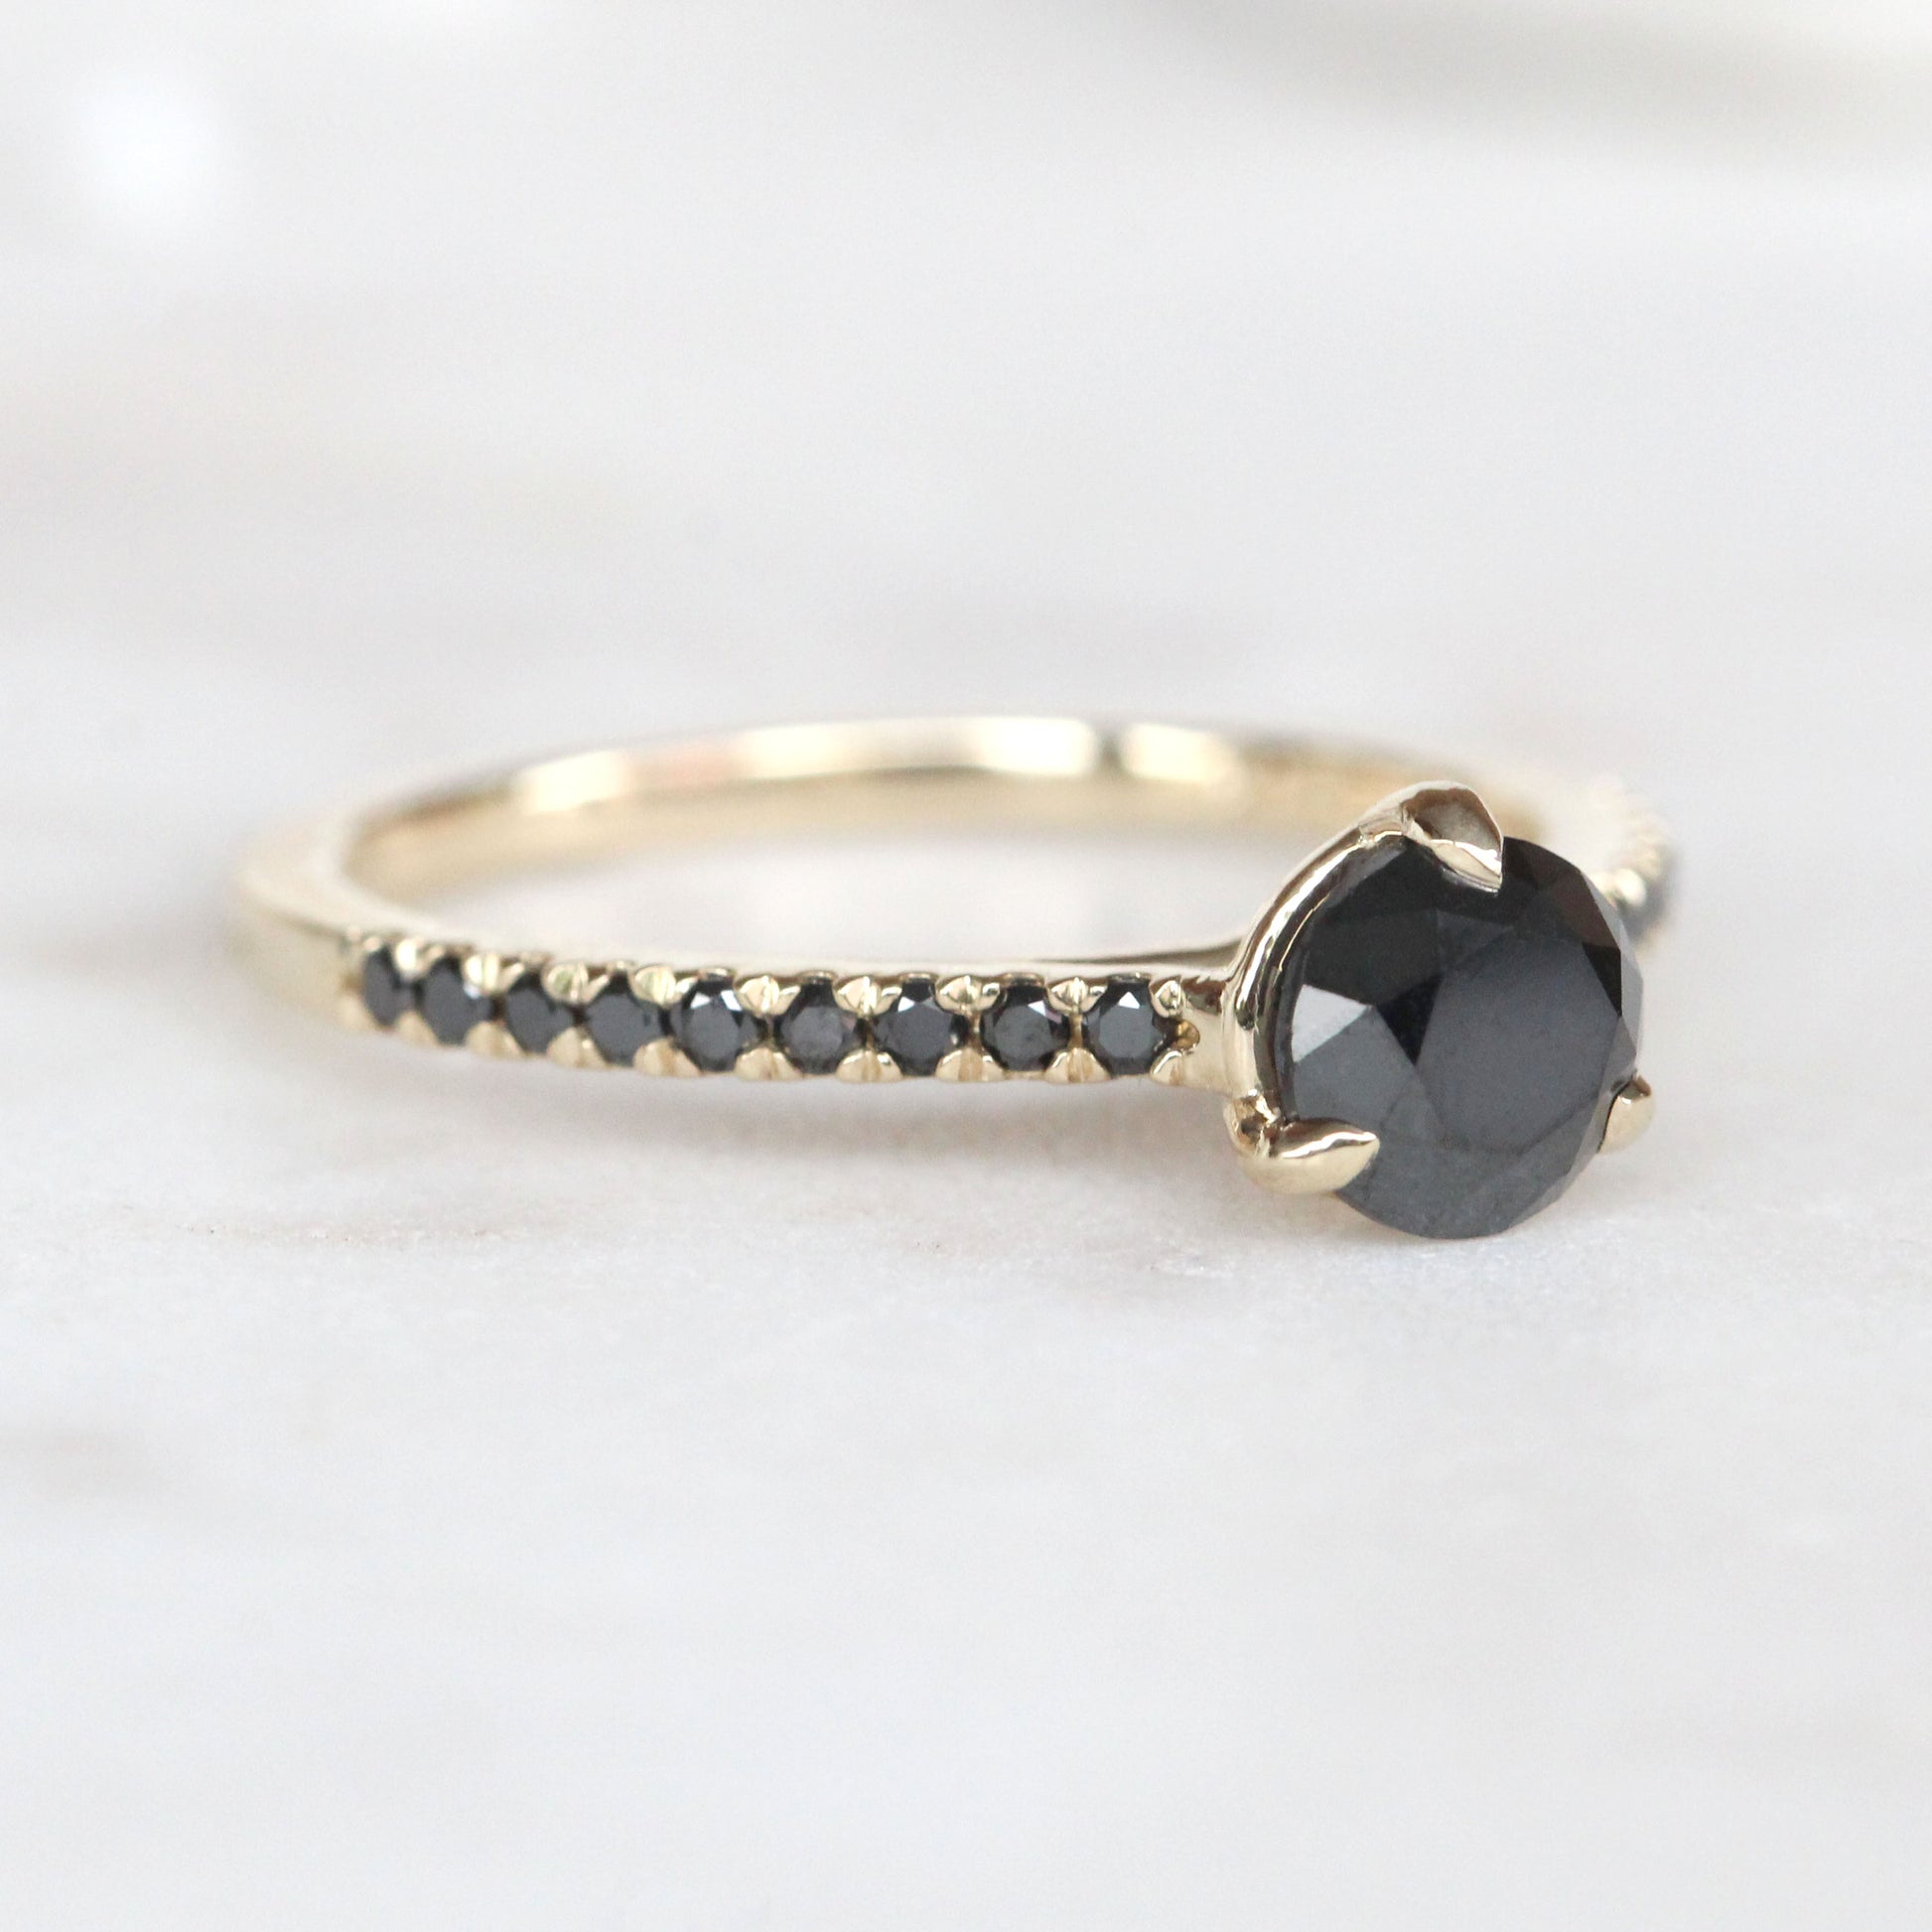 CAELEN Veronica Ring with a 1 Carat Black Diamond and Eighteen French Set Black Accent Diamonds in 10k Yellow Gold - Ready to Size and Ship - Midwinter Co. Alternative Bridal Rings and Modern Fine Jewelry